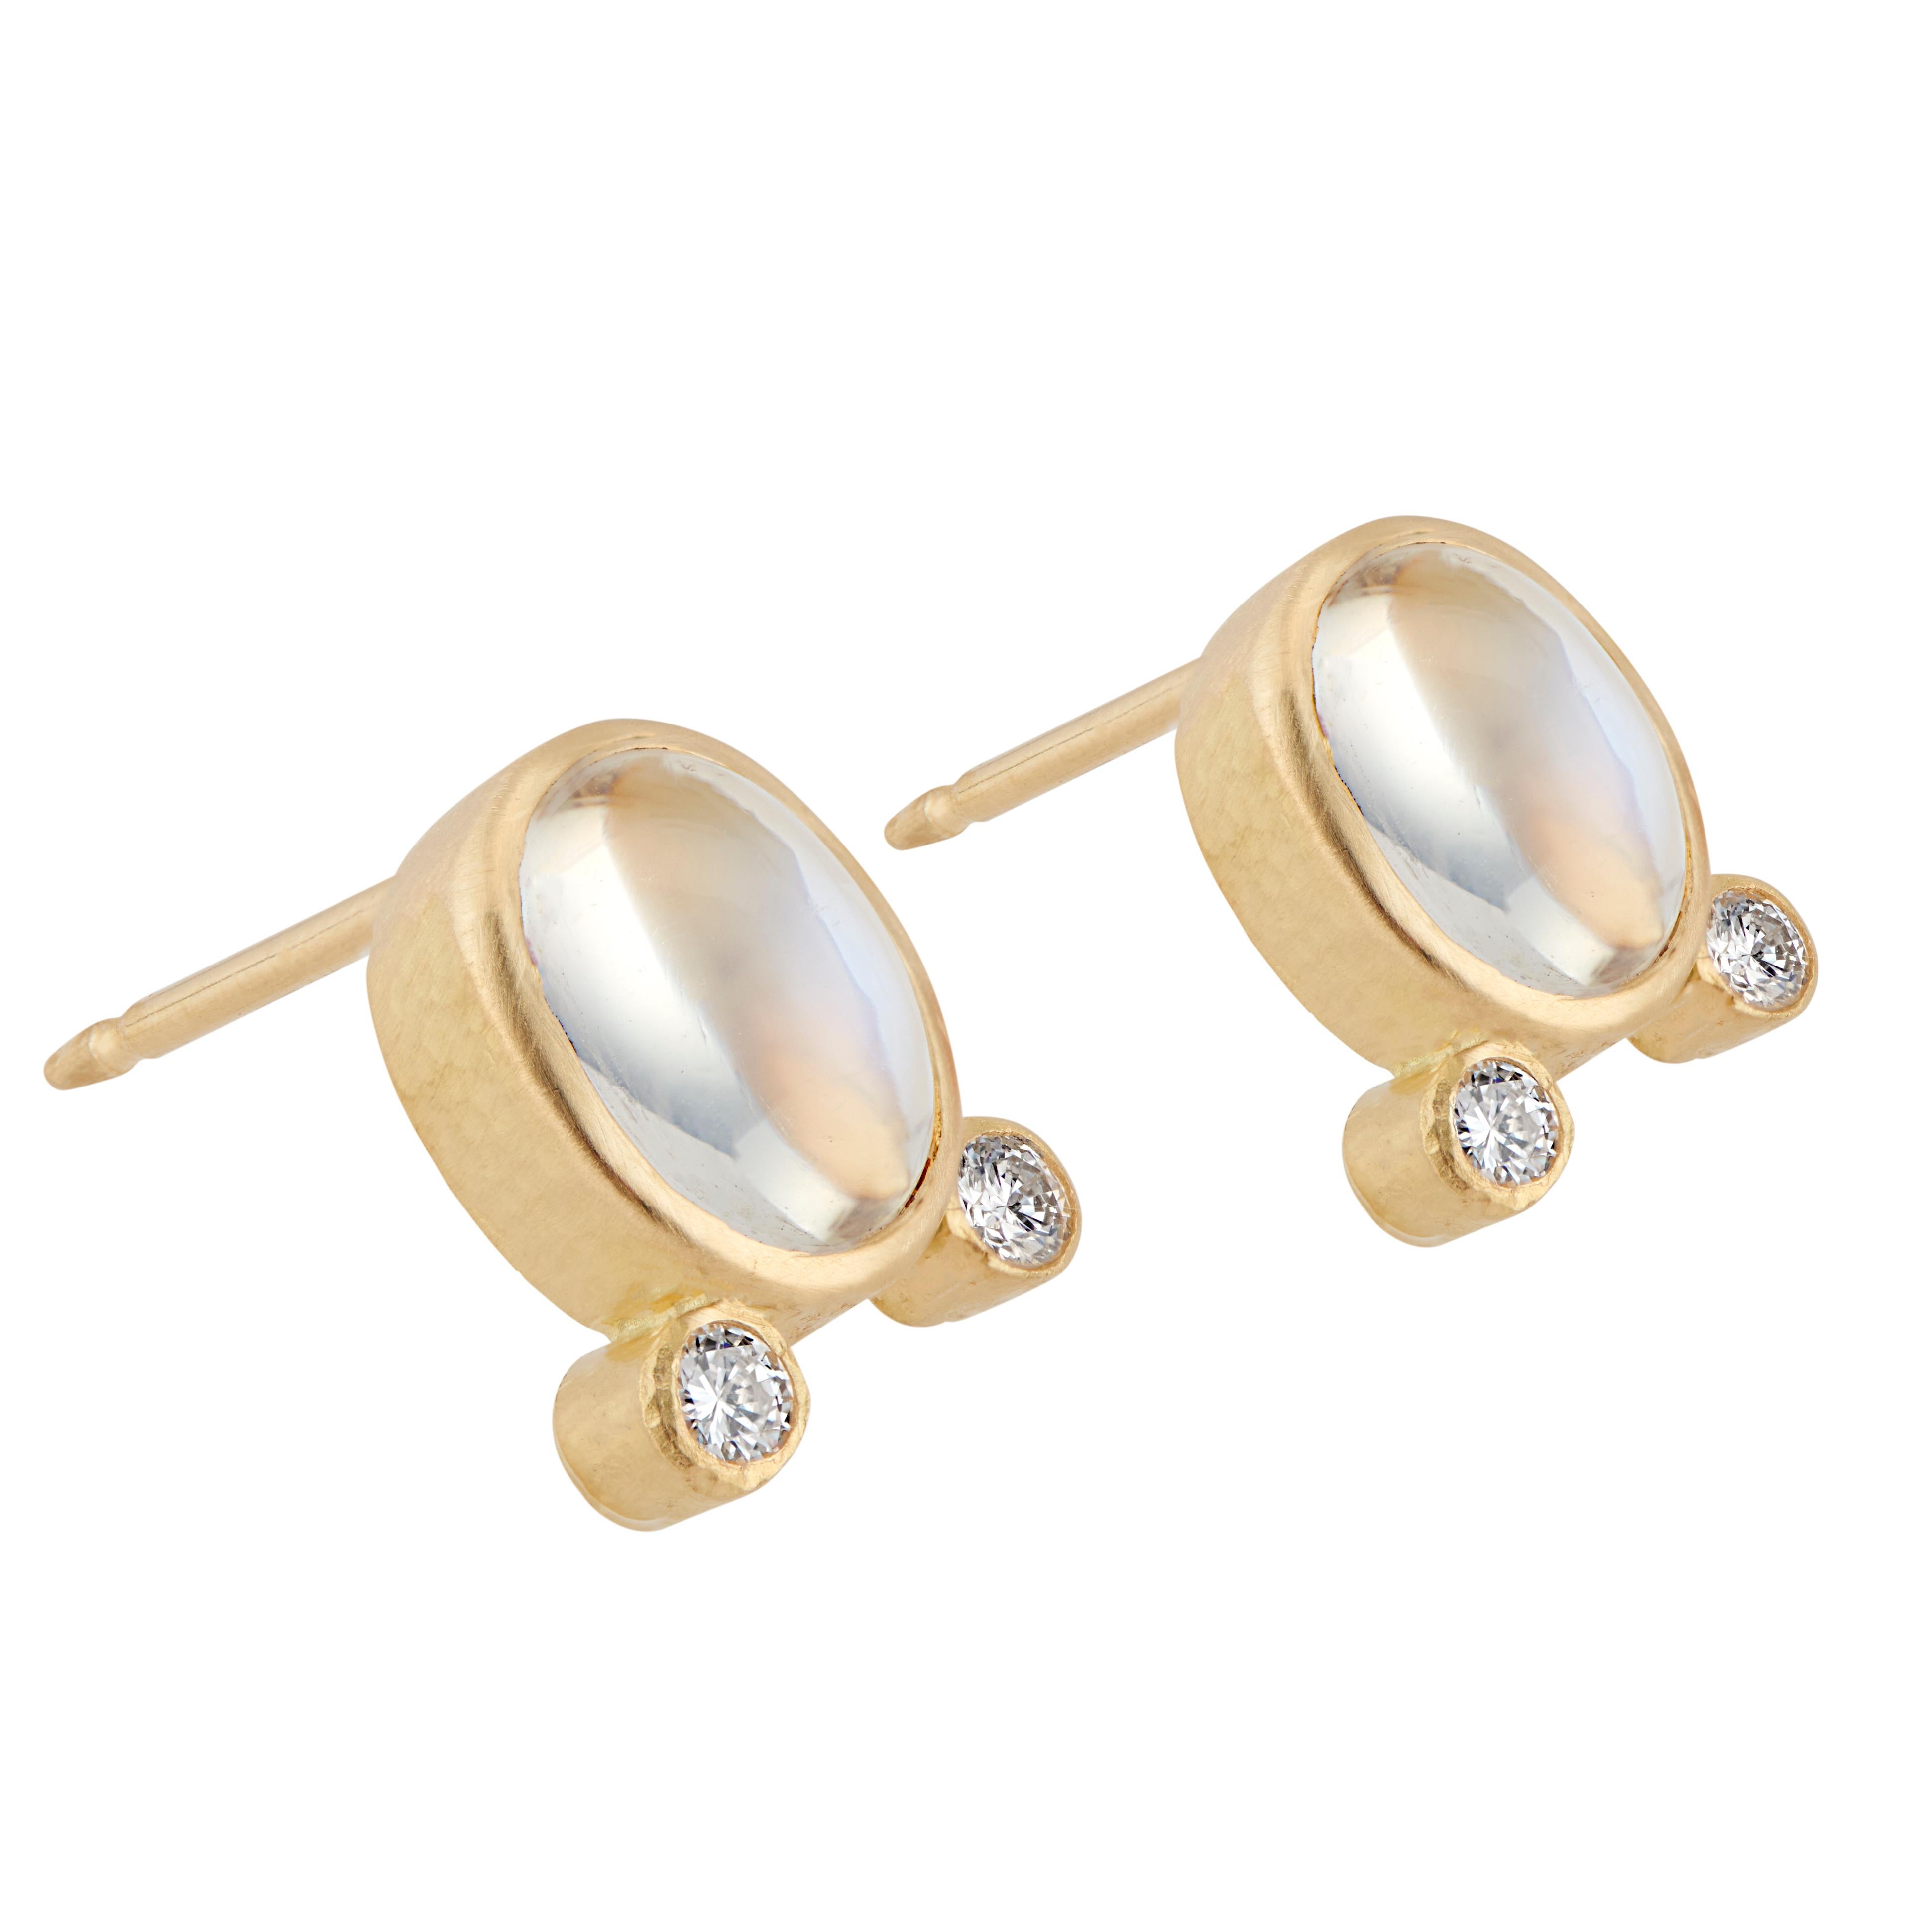 1.73 Carat Moonstone Diamond Yellow Gold Earrings In Excellent Condition For Sale In Stamford, CT